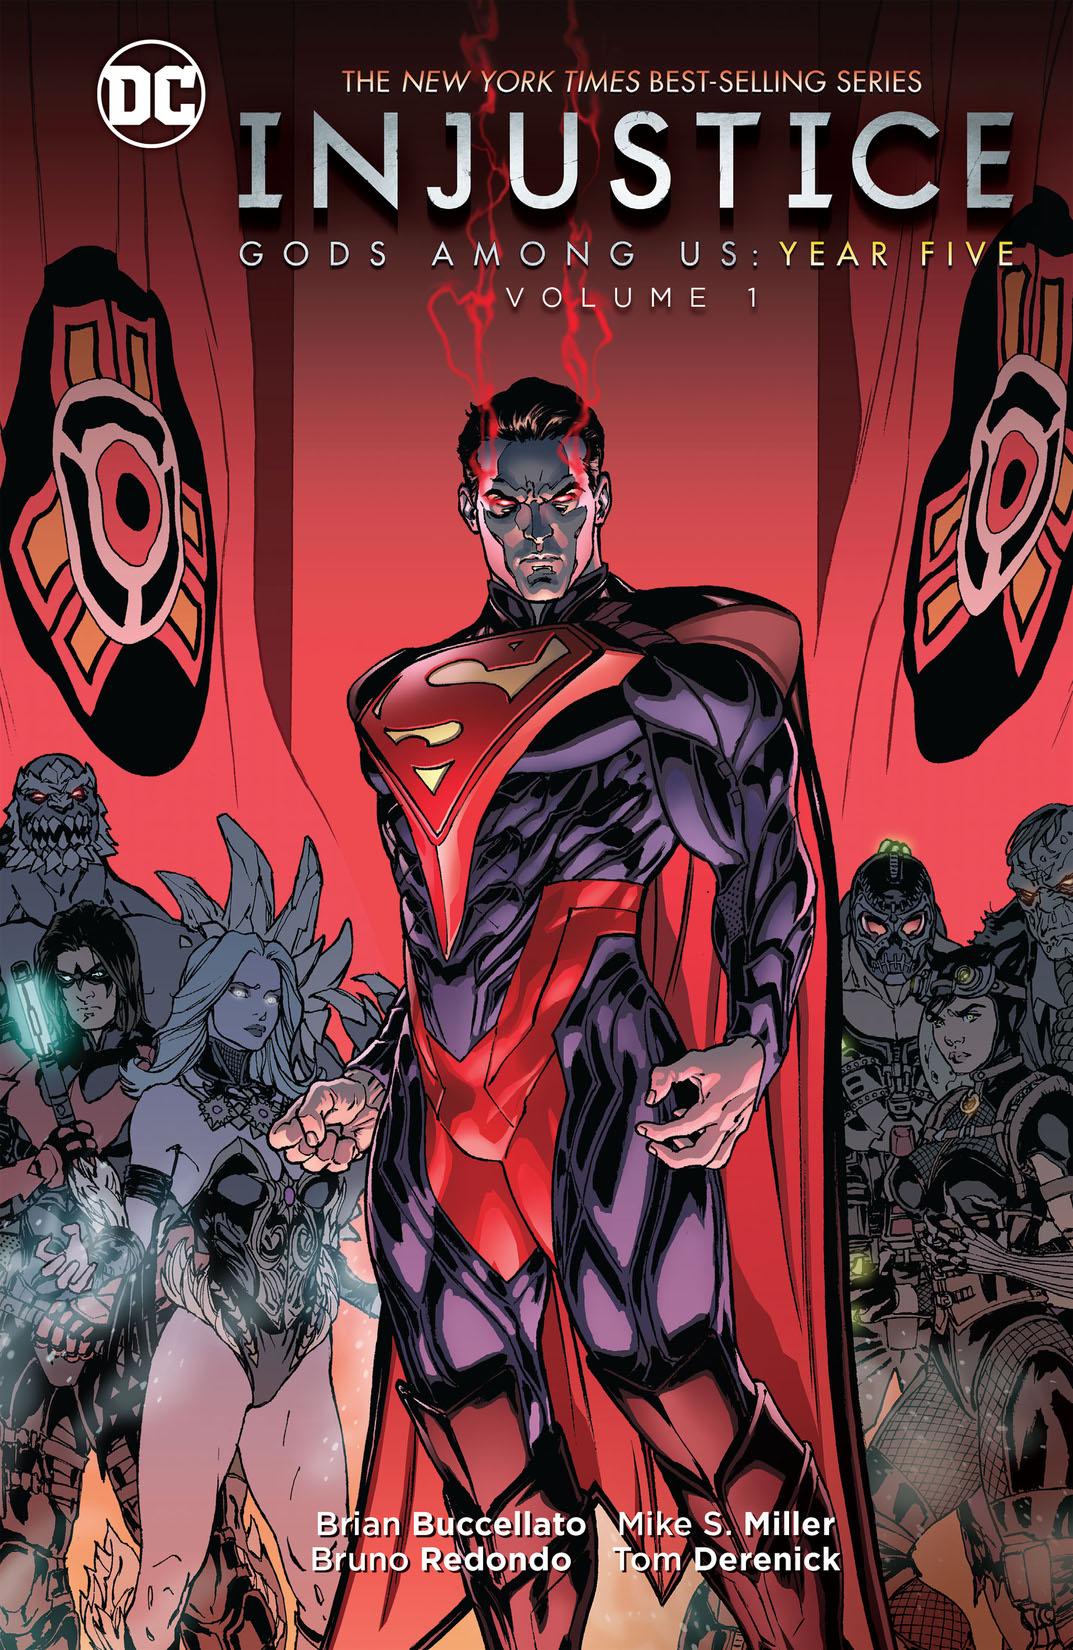 Injustice: Gods Among Us: Year Five Vol. 1 preview images